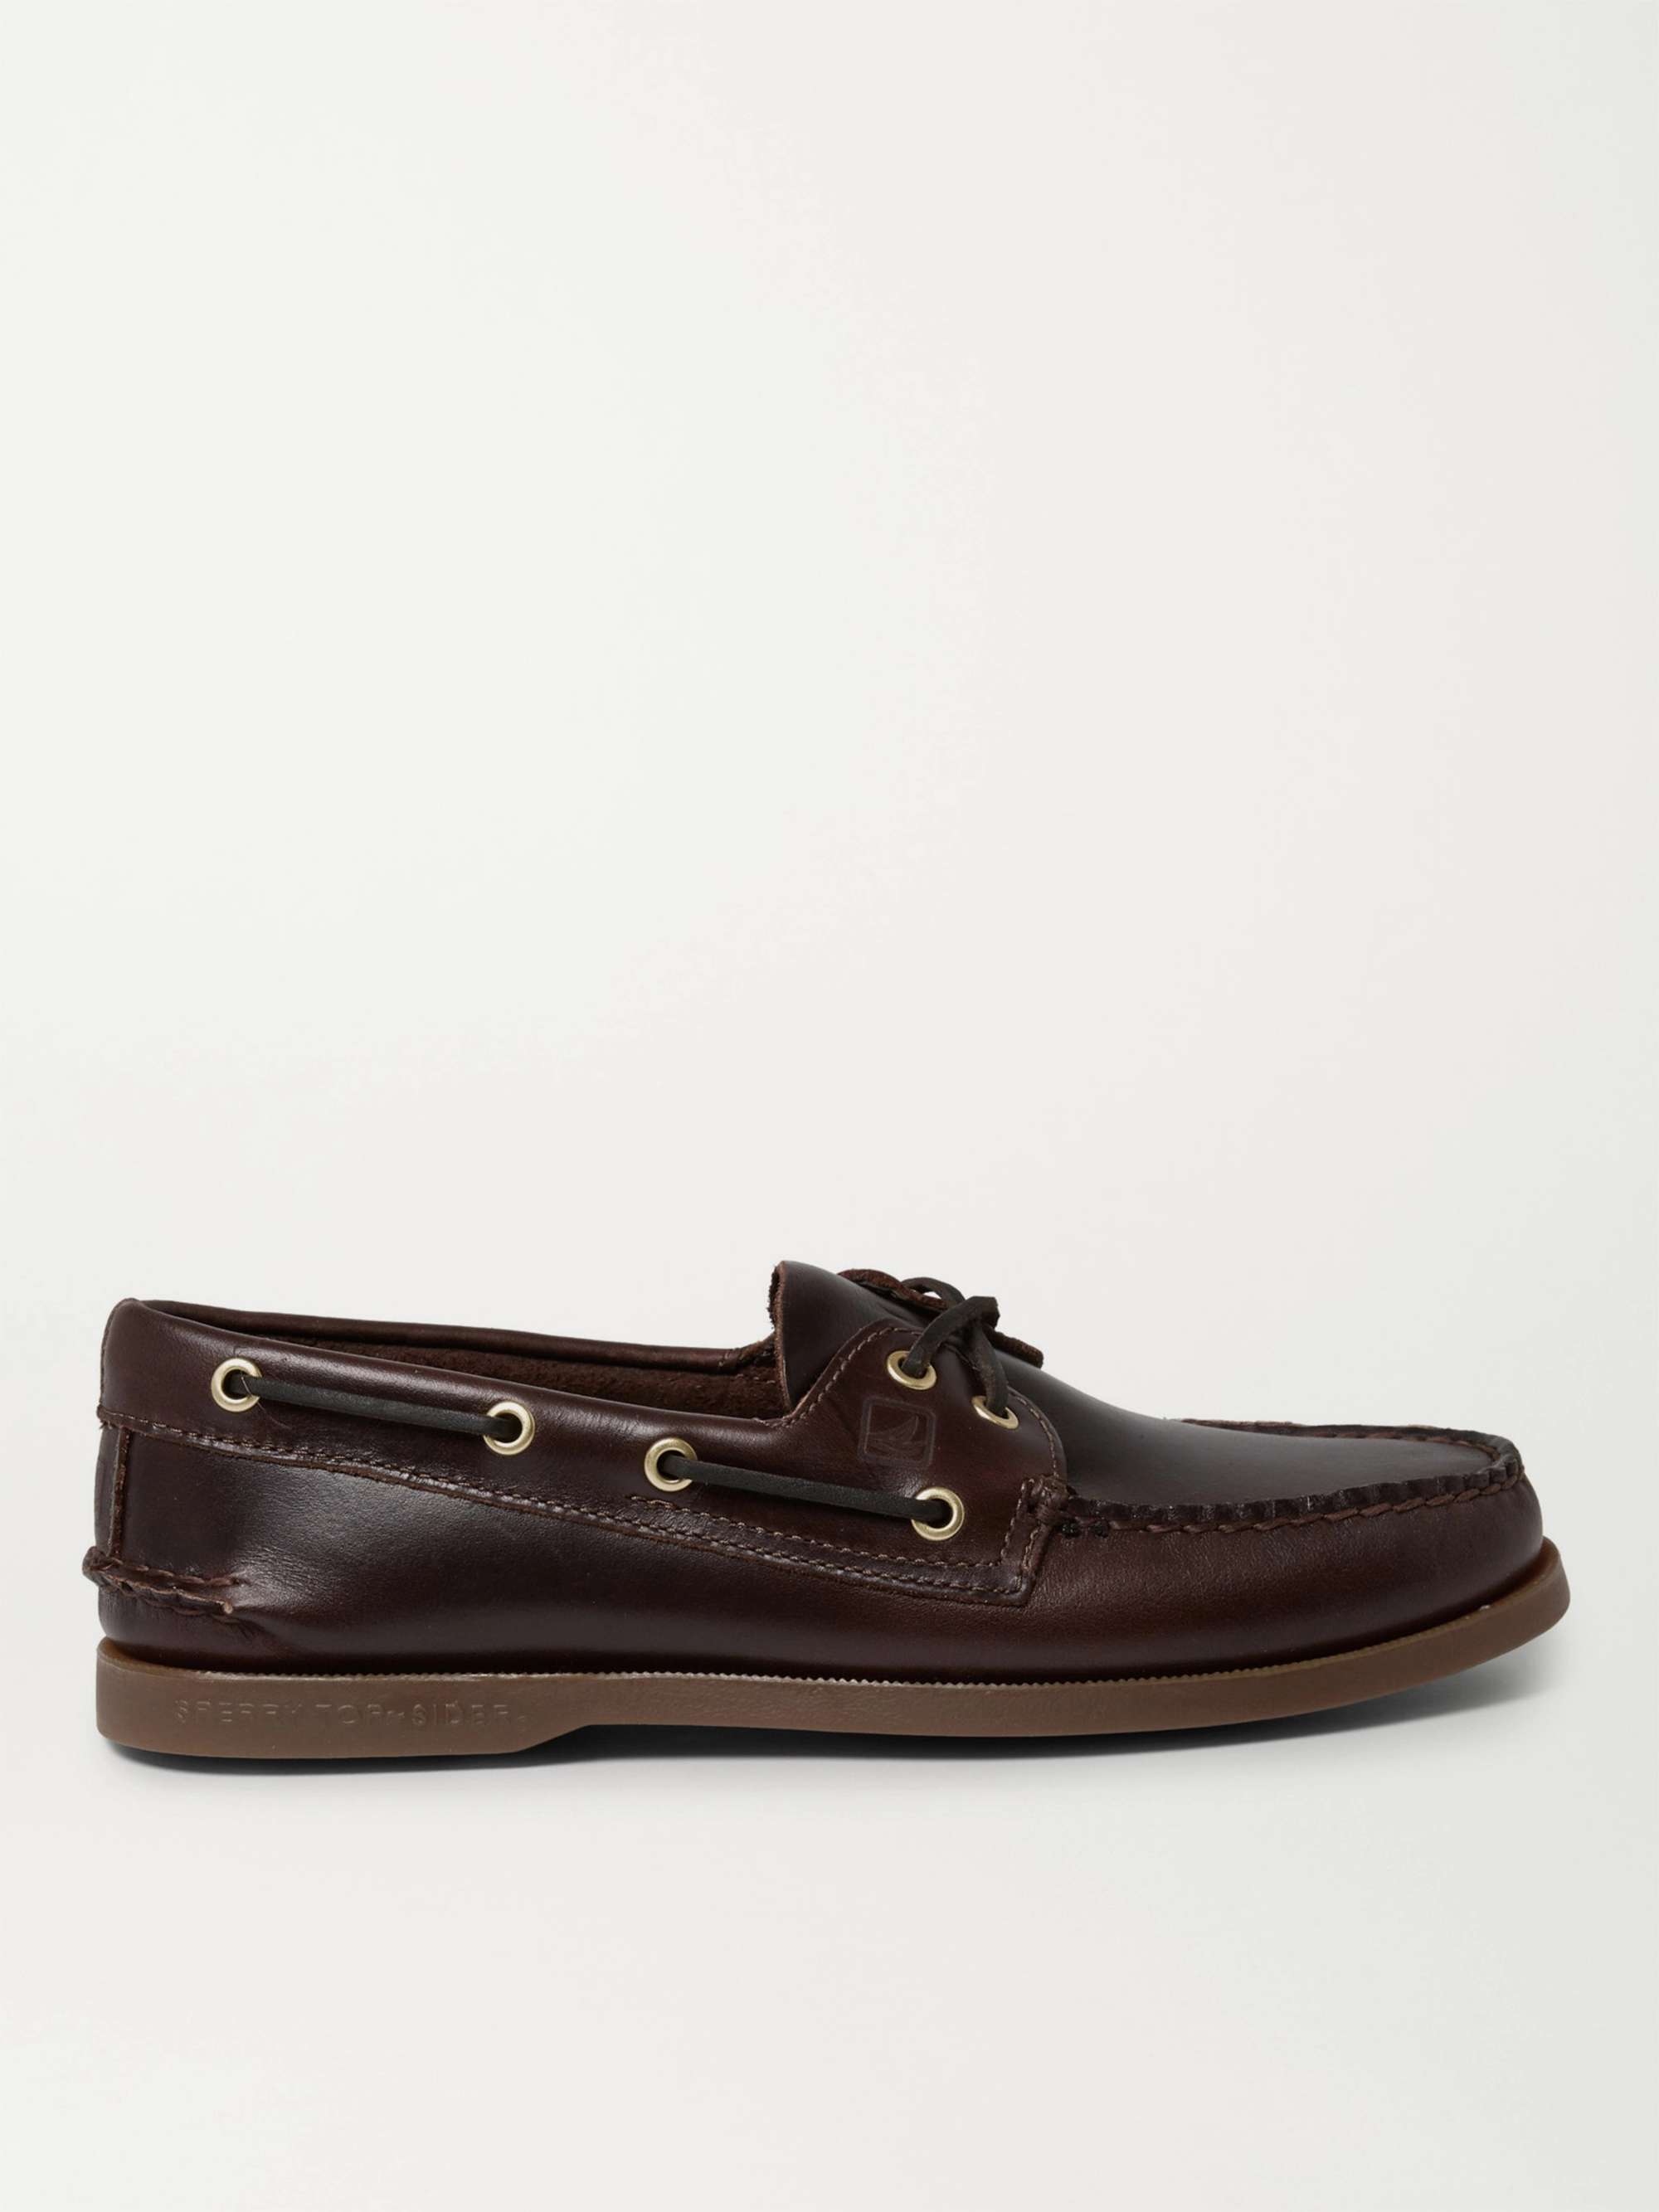 SPERRY Authentic Original Burnished-Leather Boat Shoes